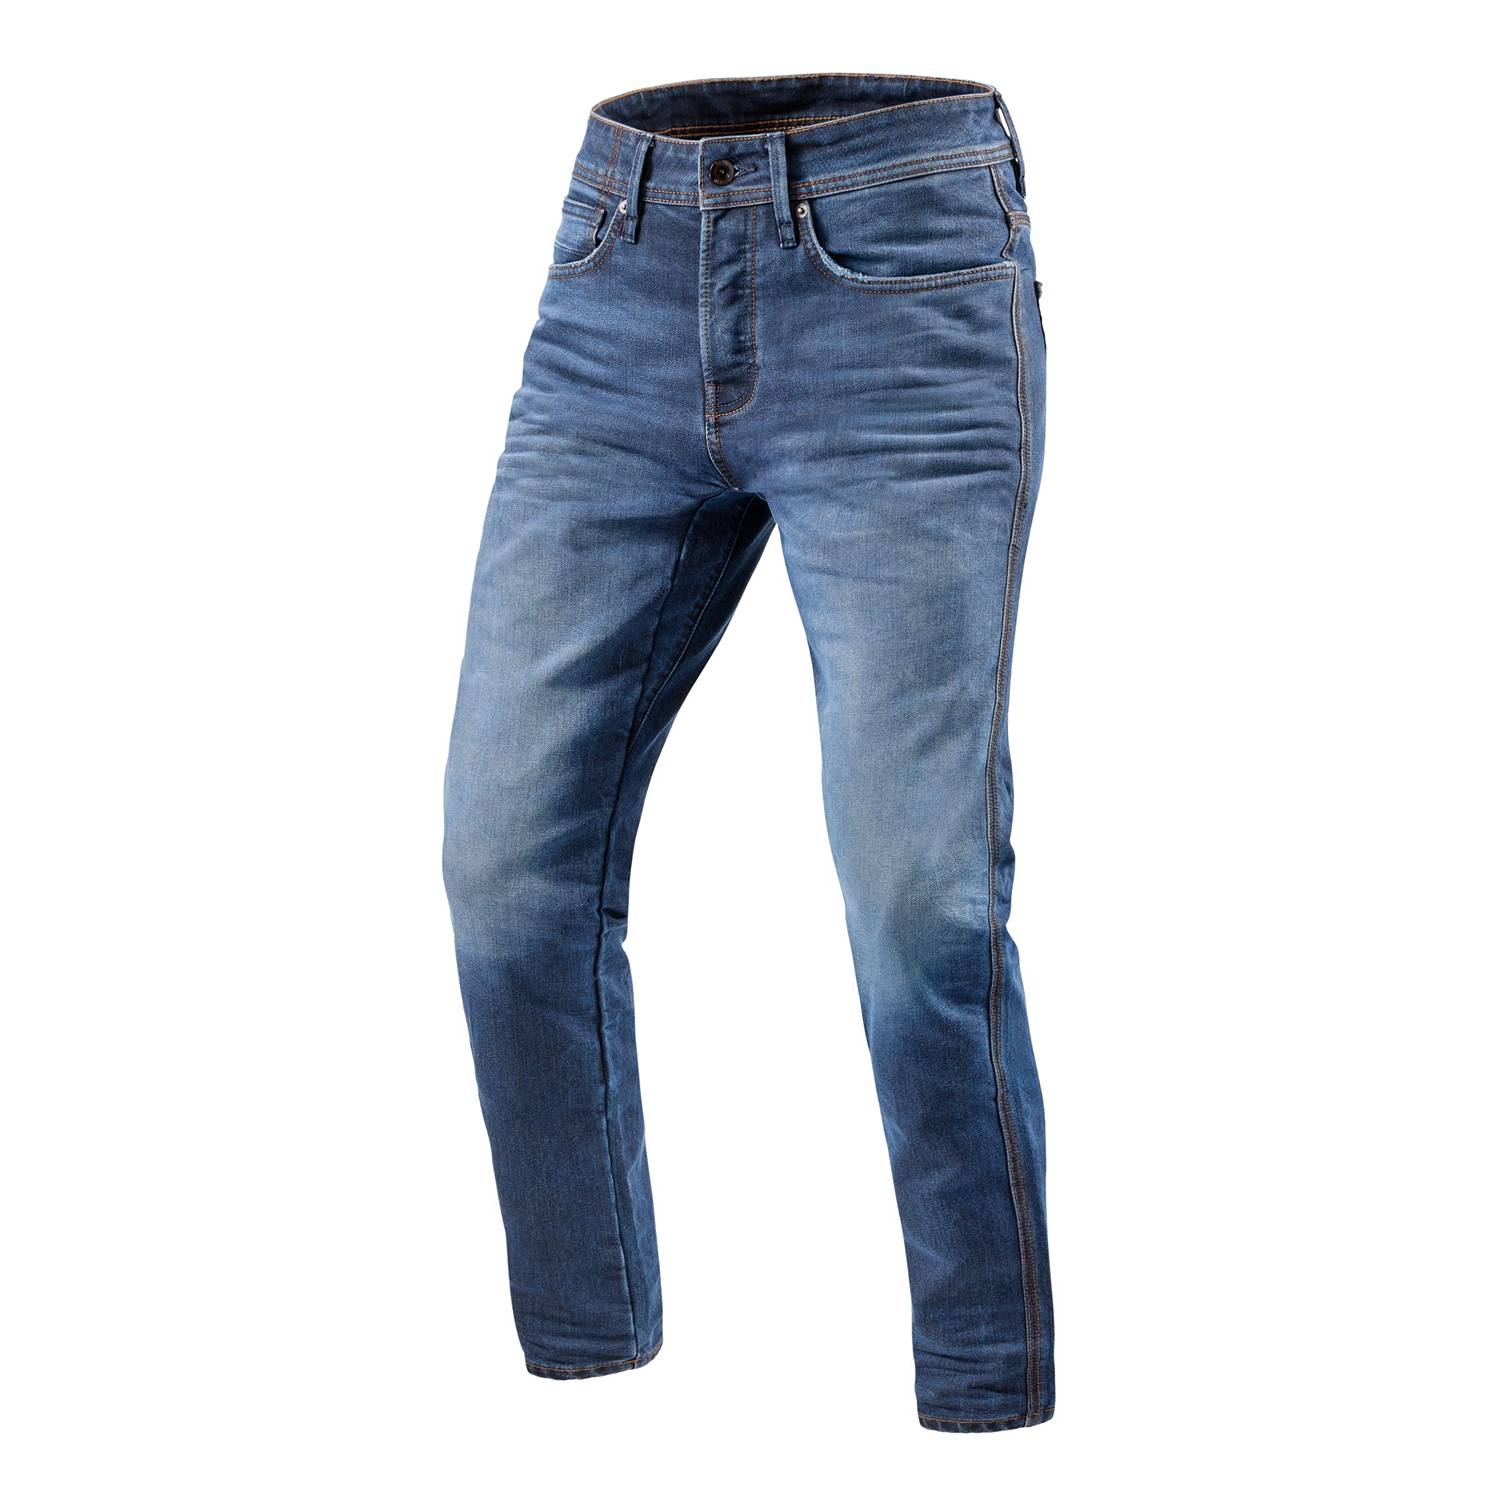 Image of REV'IT! Jeans Reed SF Mid Blue Used Motorcycle Jeans Size L36/W38 ID 8700001337397